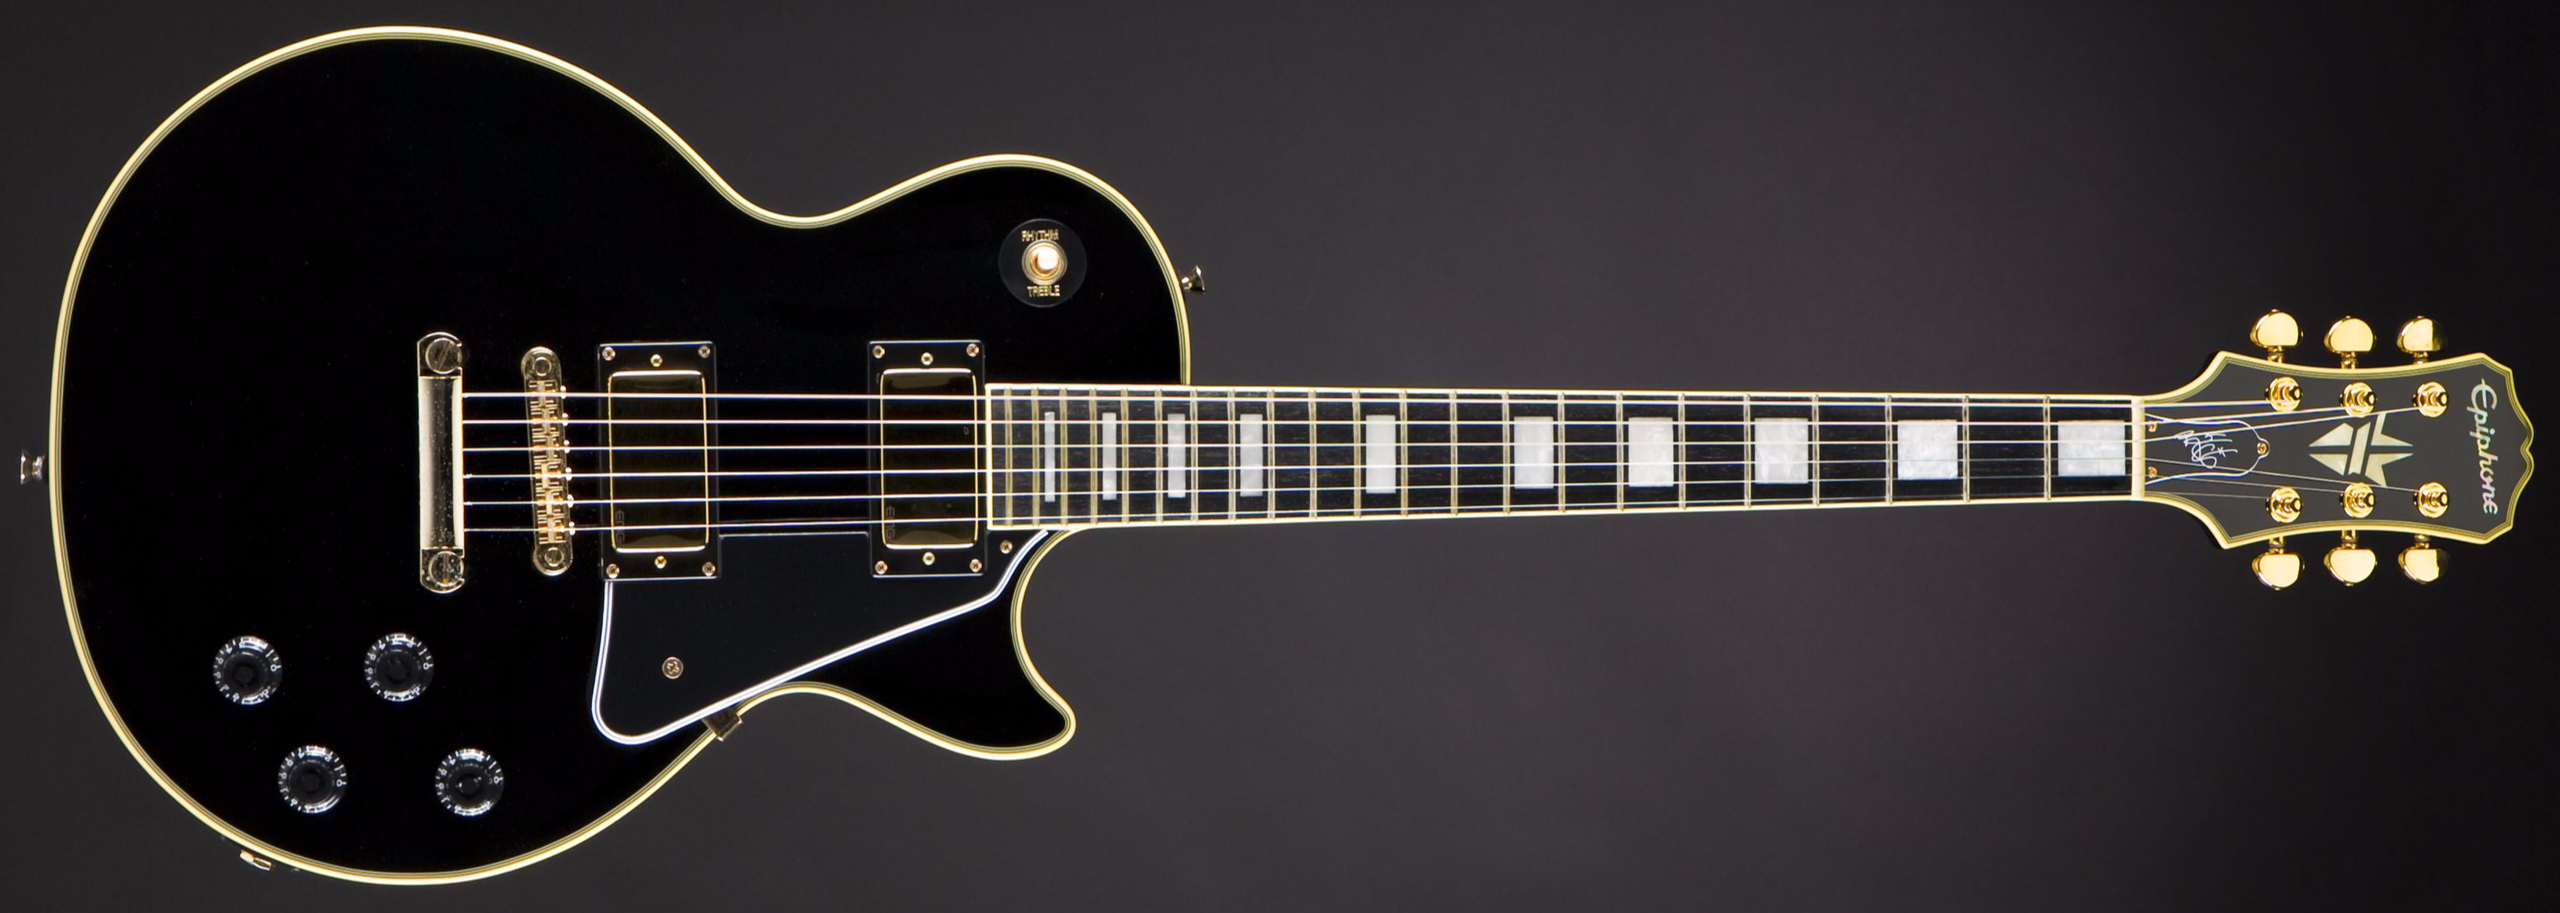 Epiphone Limited Edition Björn Gelotte Les Paul Custom | MUSIC STORE  professional